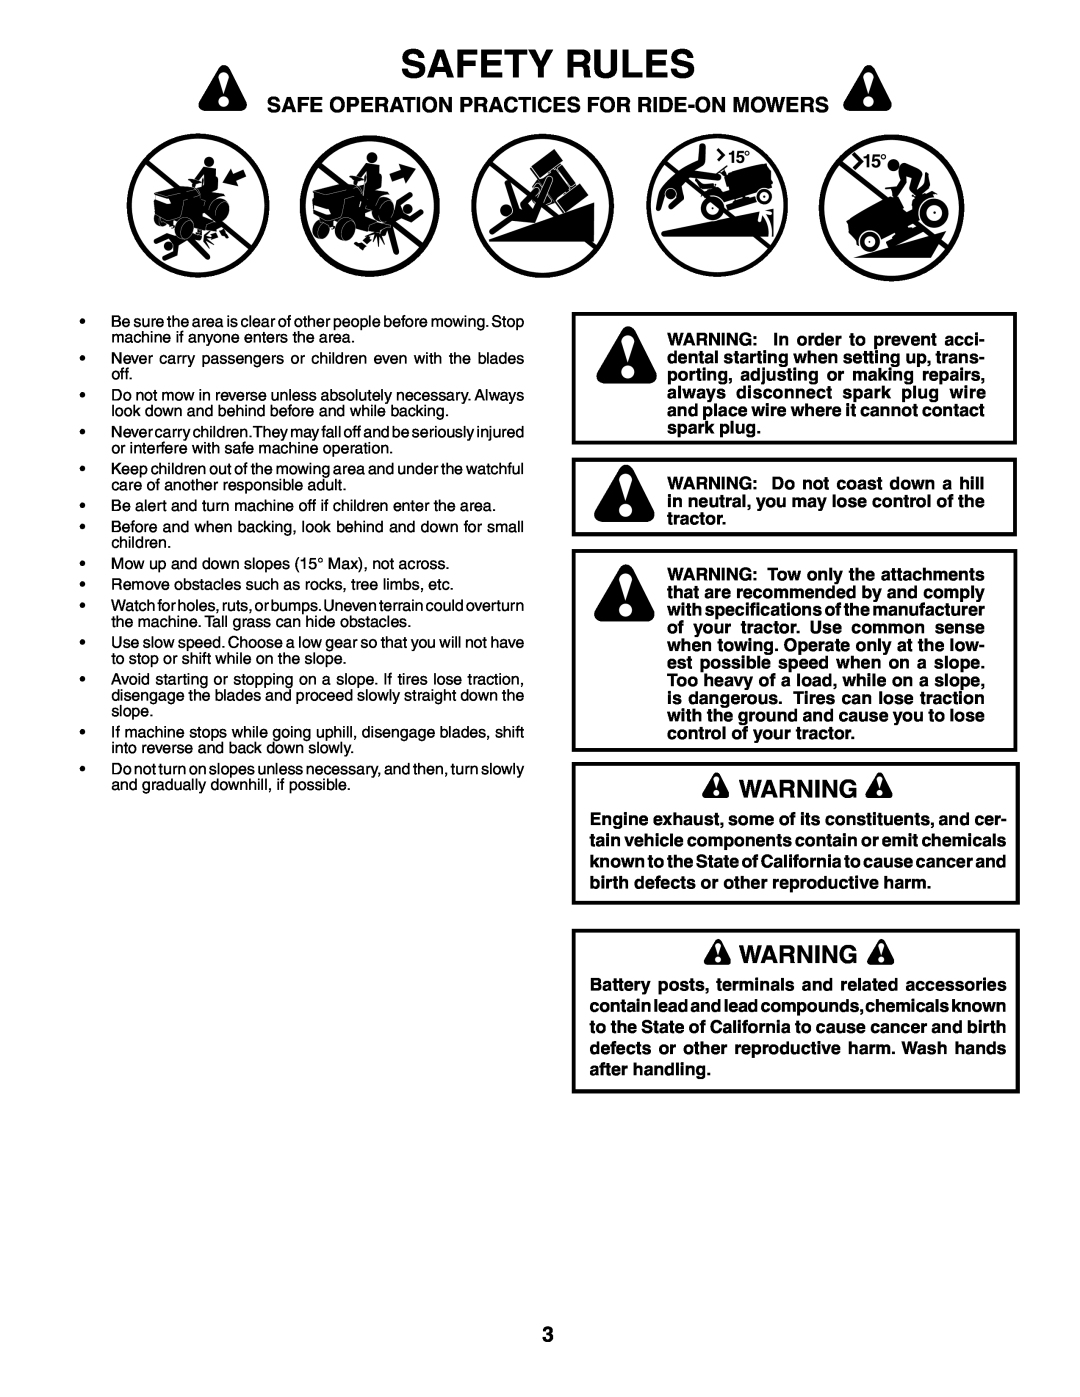 Poulan 186914, 954567833 owner manual Safety Rules, Safe Operation Practices For Ride-On Mowers 